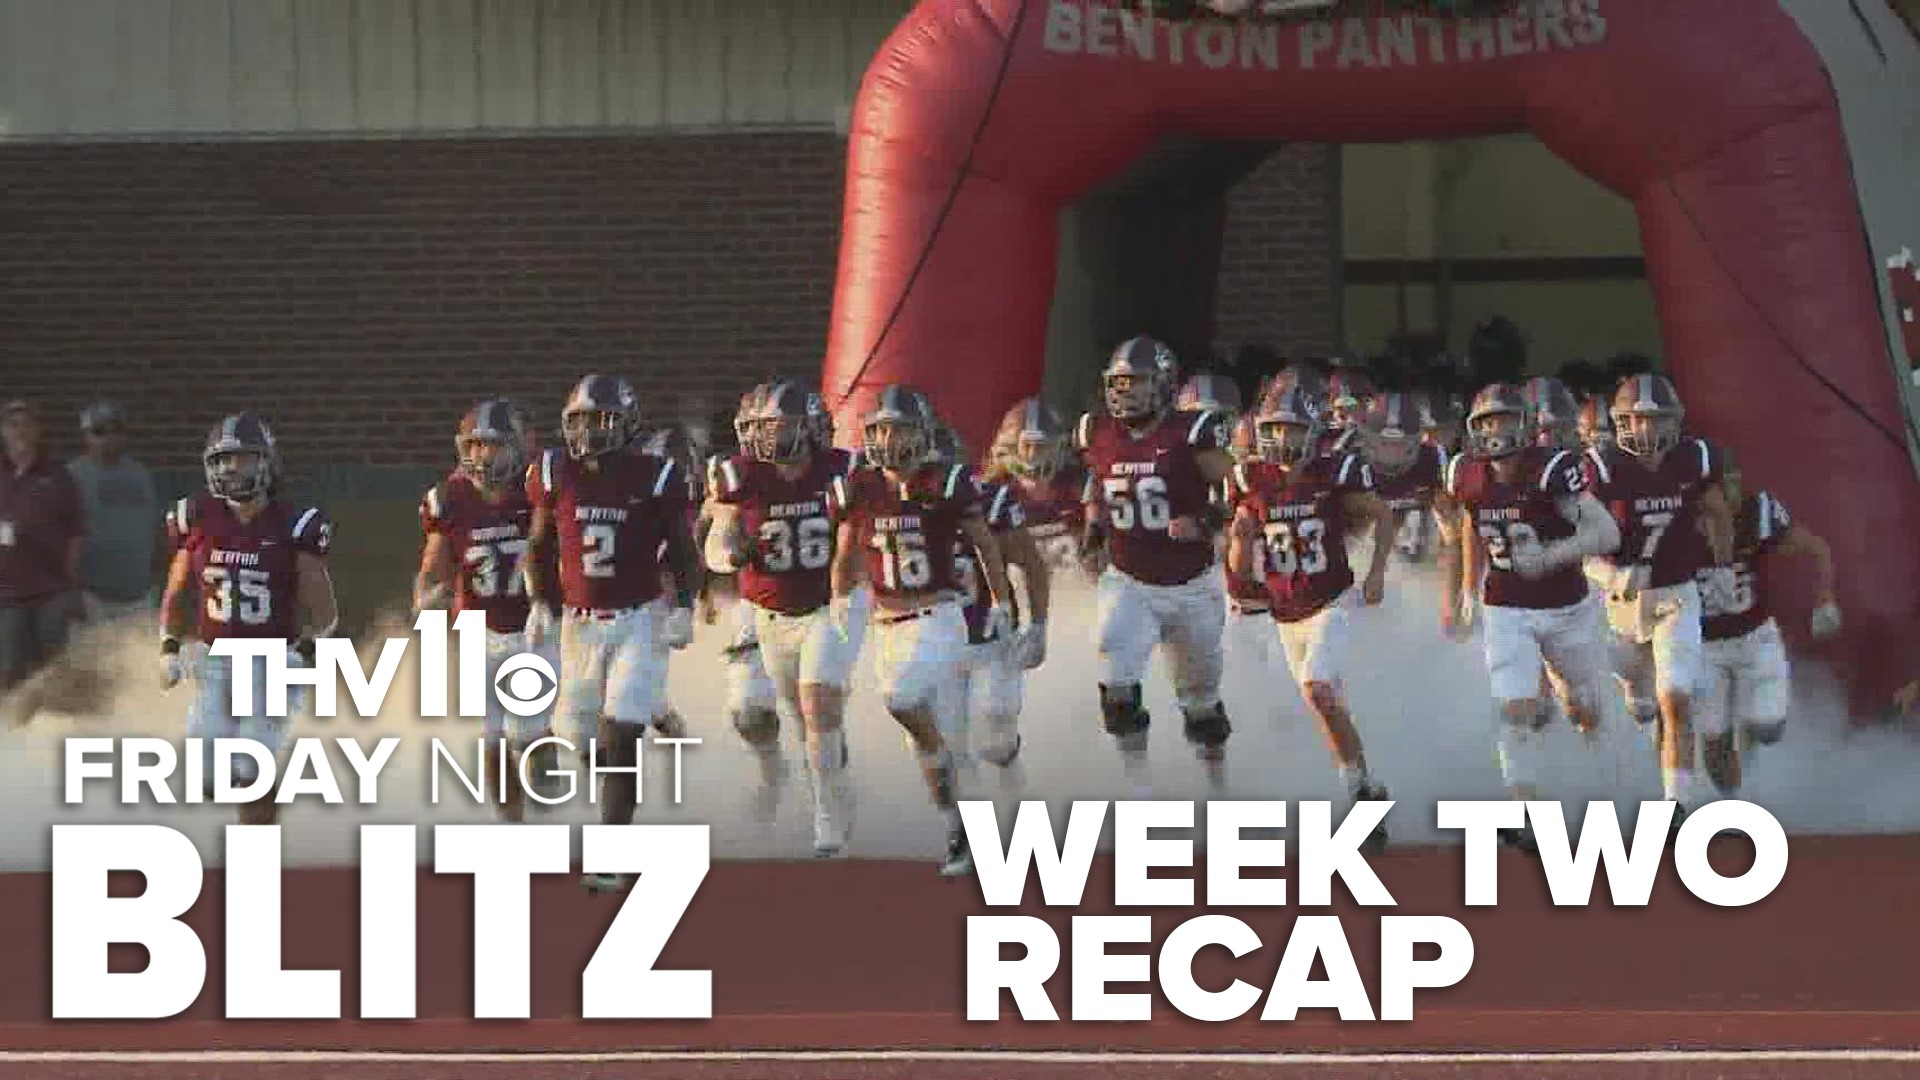 Cierra Clark and Craig O'Neill have your complete recap for Week 2 of Arkansas high school football.